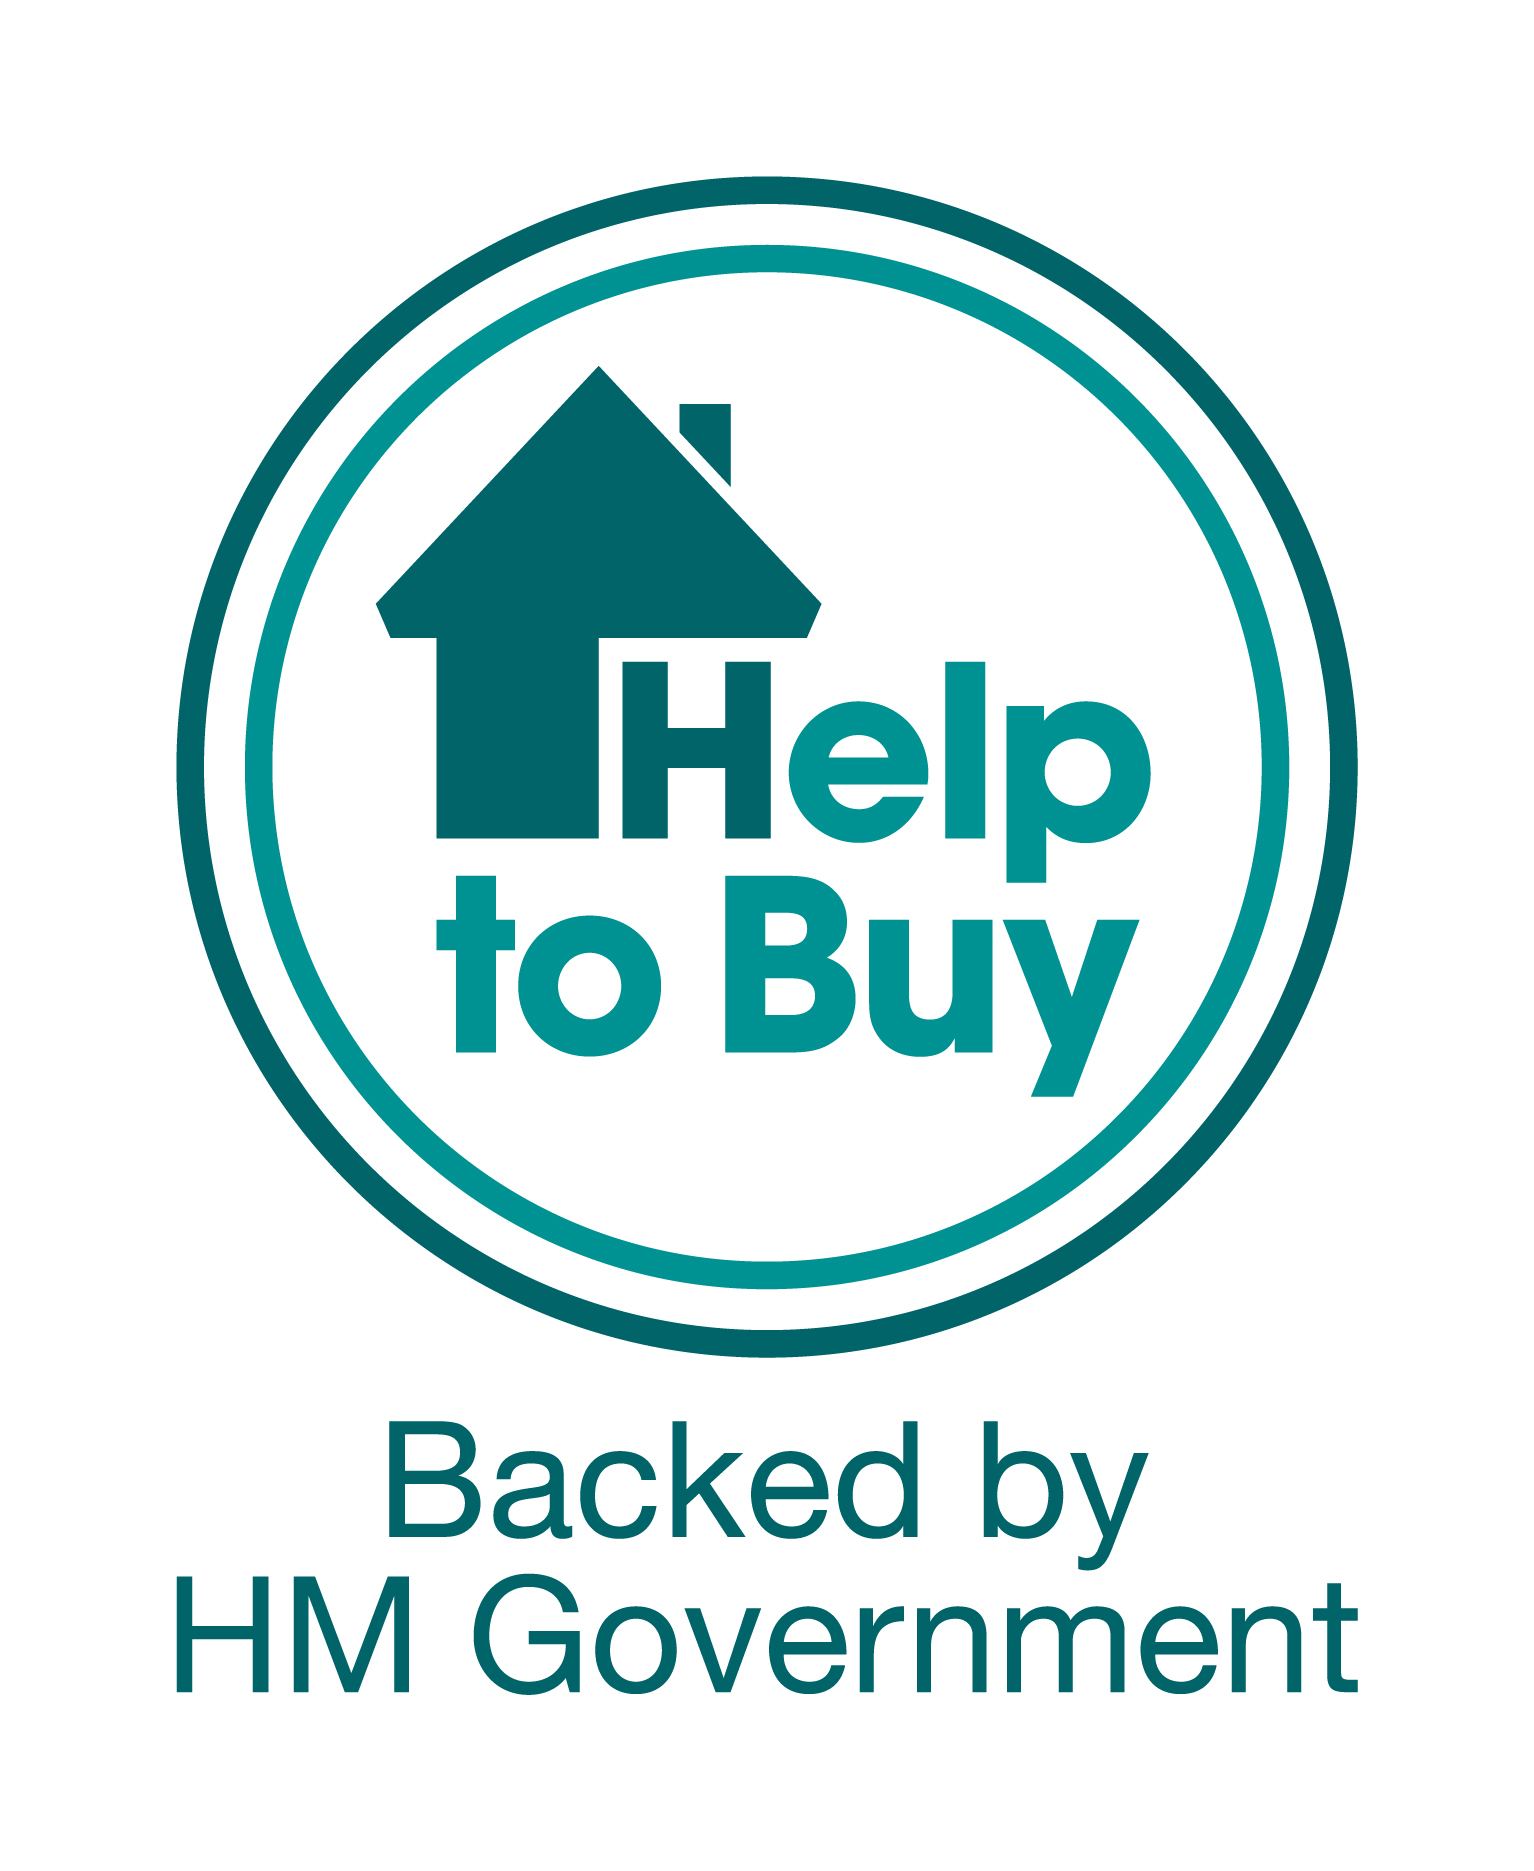 help to buy logo backed by HM government